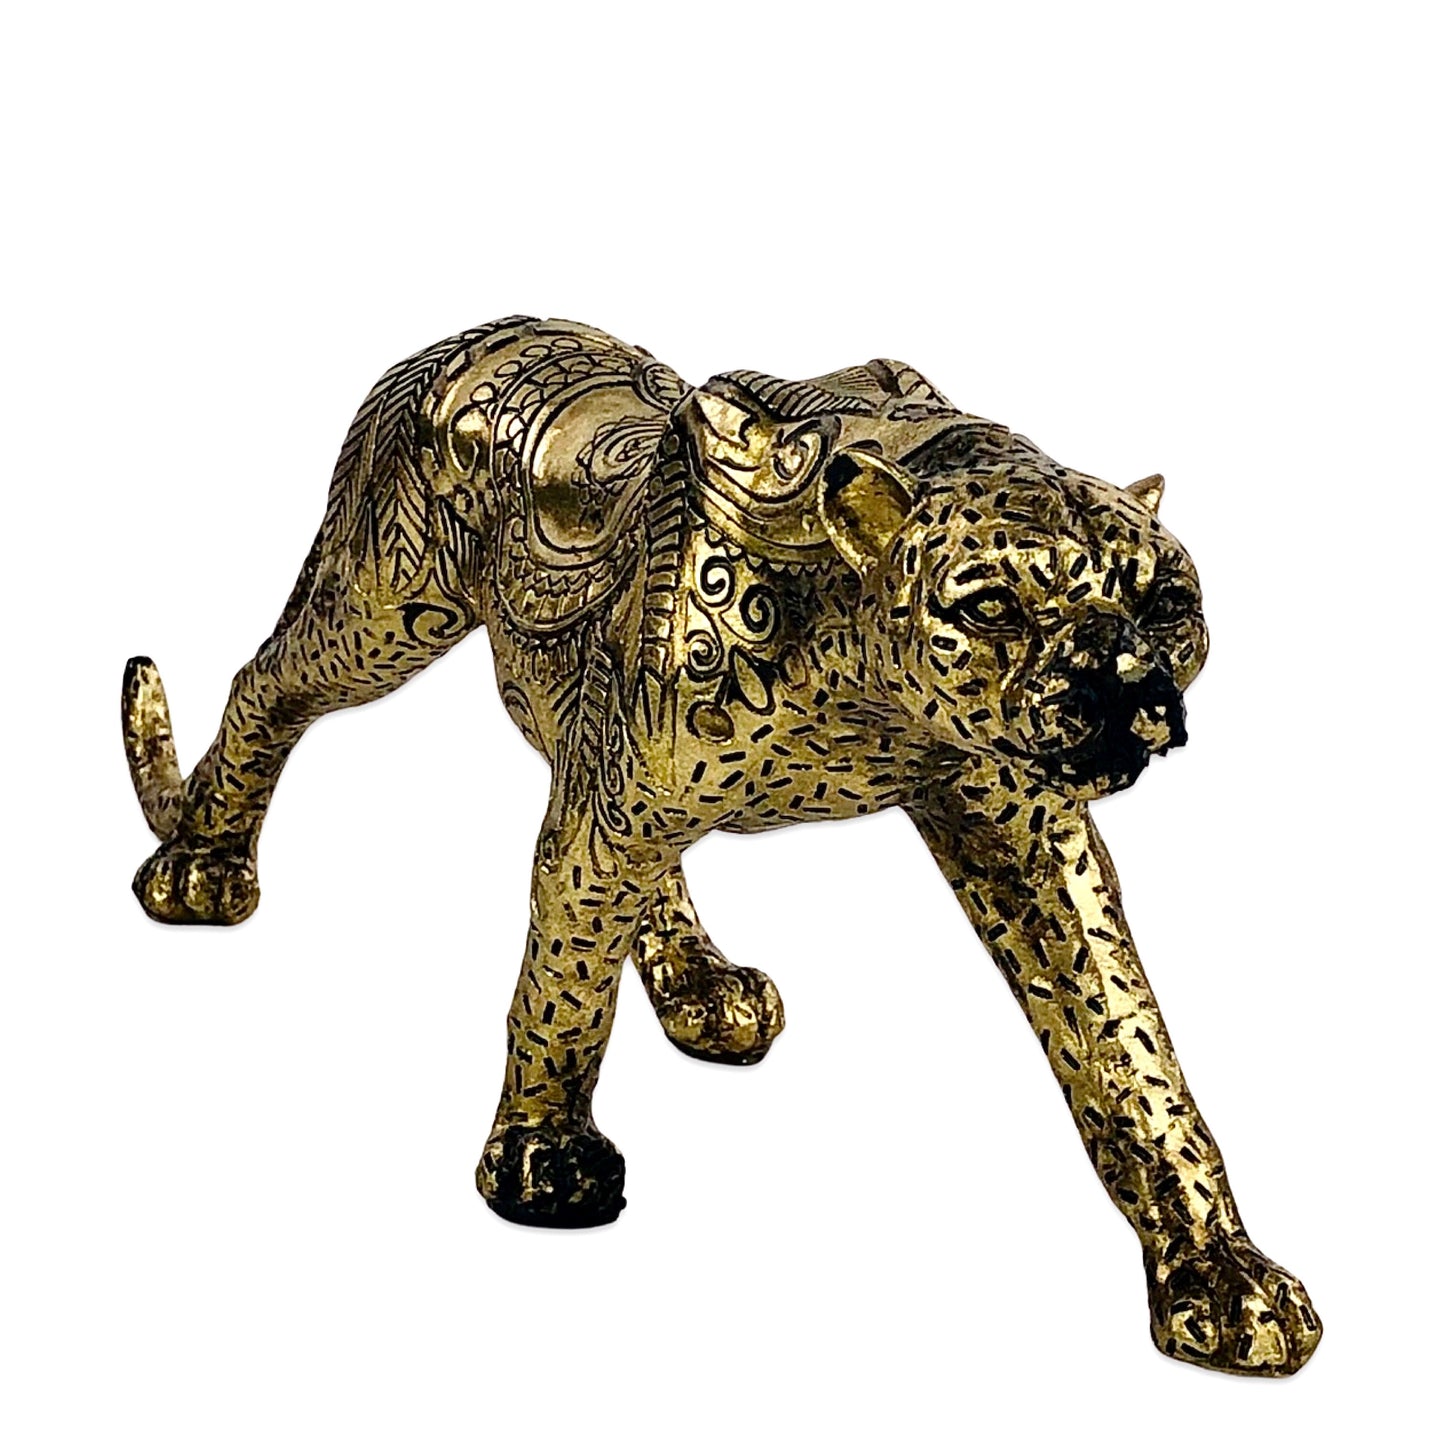 TRADITIONED DESIGN PRINTED ON CHEETAH SCULPTURE